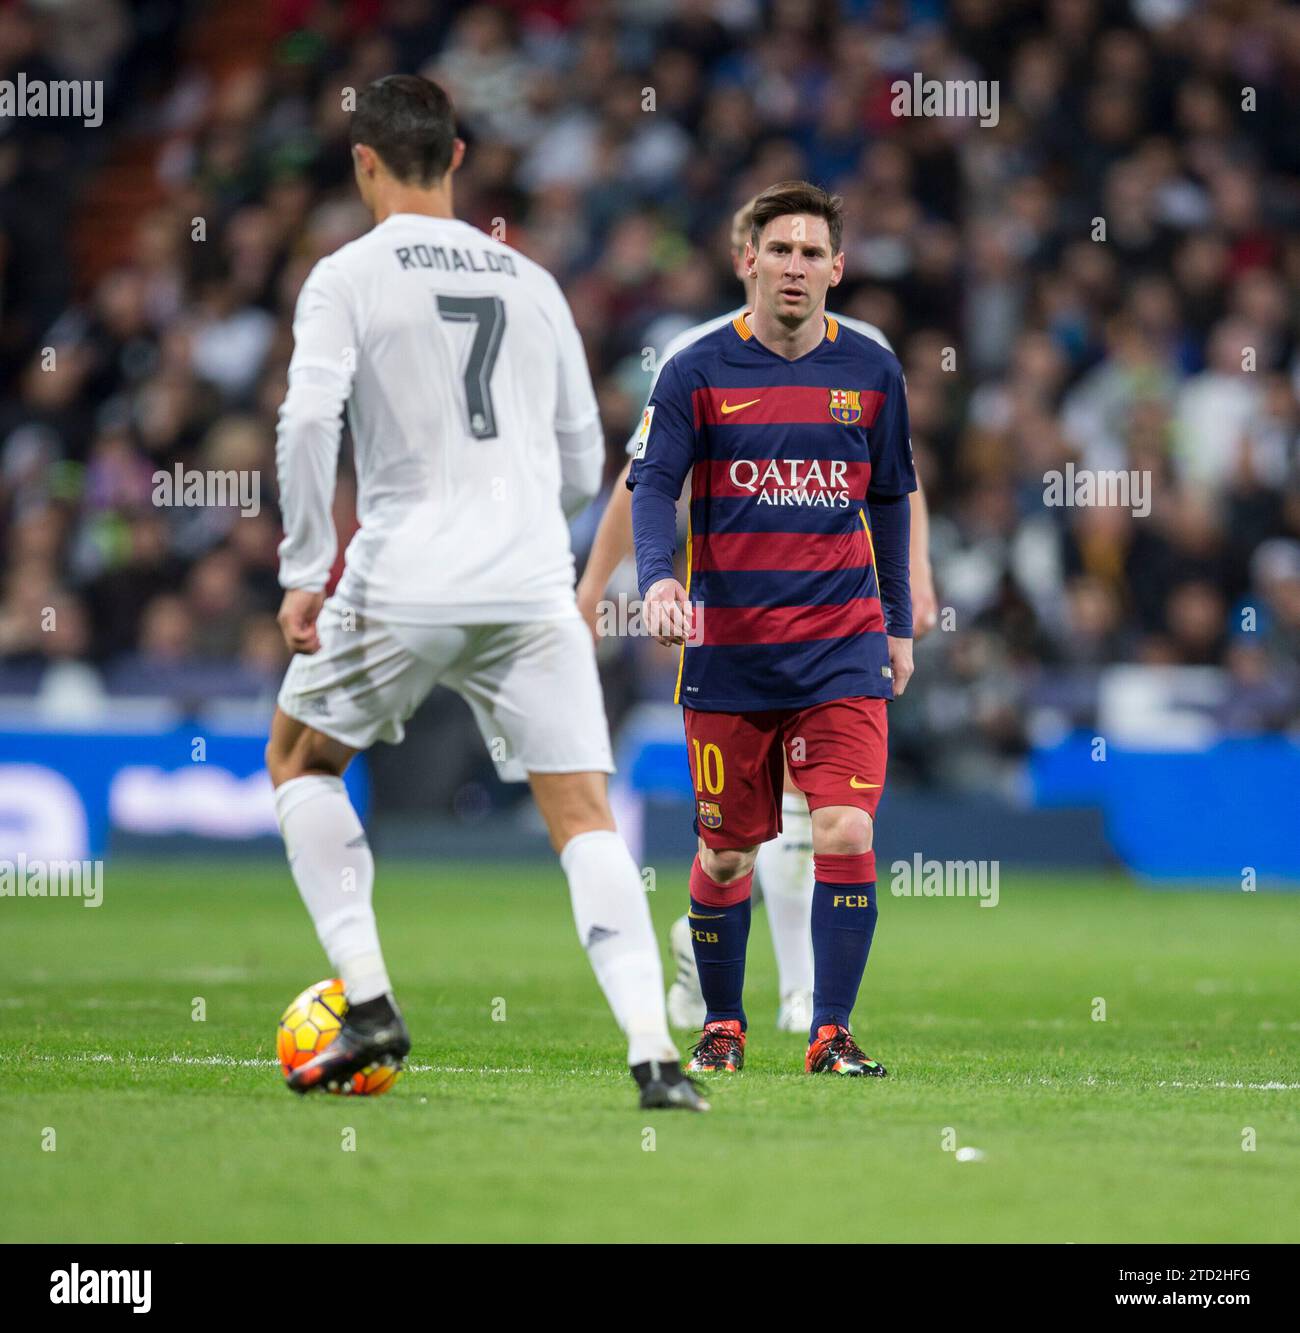 Madrid, 11/21/2015. League match played at the Santiago Bernabéu stadium, between Real Madrid and Fútbol Club Barcelona. In the image, Messi and Cristiano Ronaldo at a moment of the meeting. Photo: Ignacio Gil ARCHDC. Credit: Album / Archivo ABC / Ignacio Gil Stock Photo